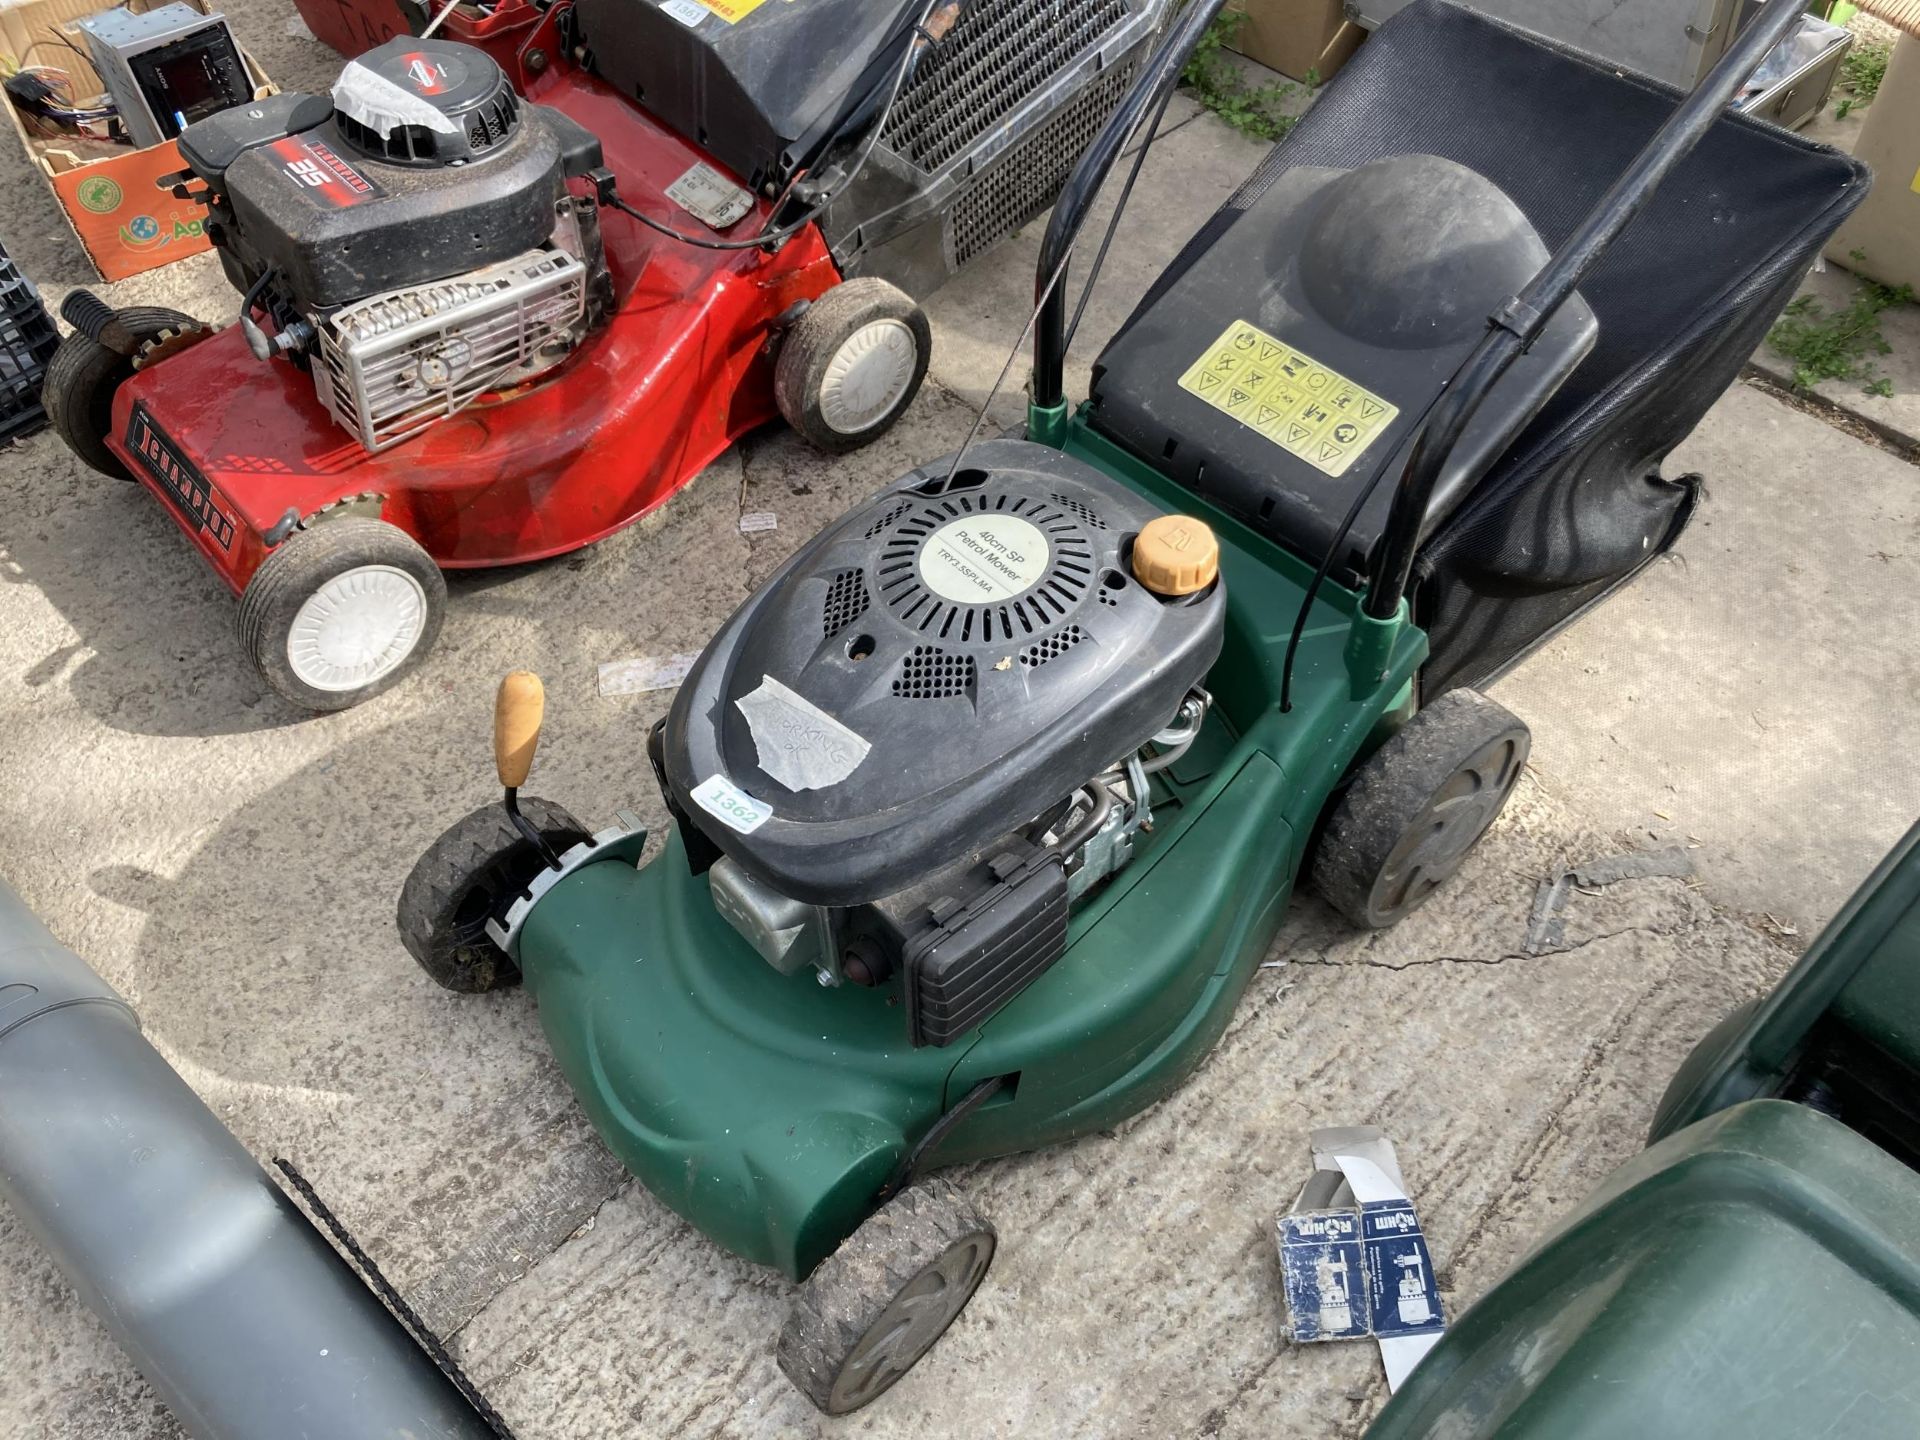 A PETROL ROTARY LAWN MOWER NO VAT - Image 2 of 4